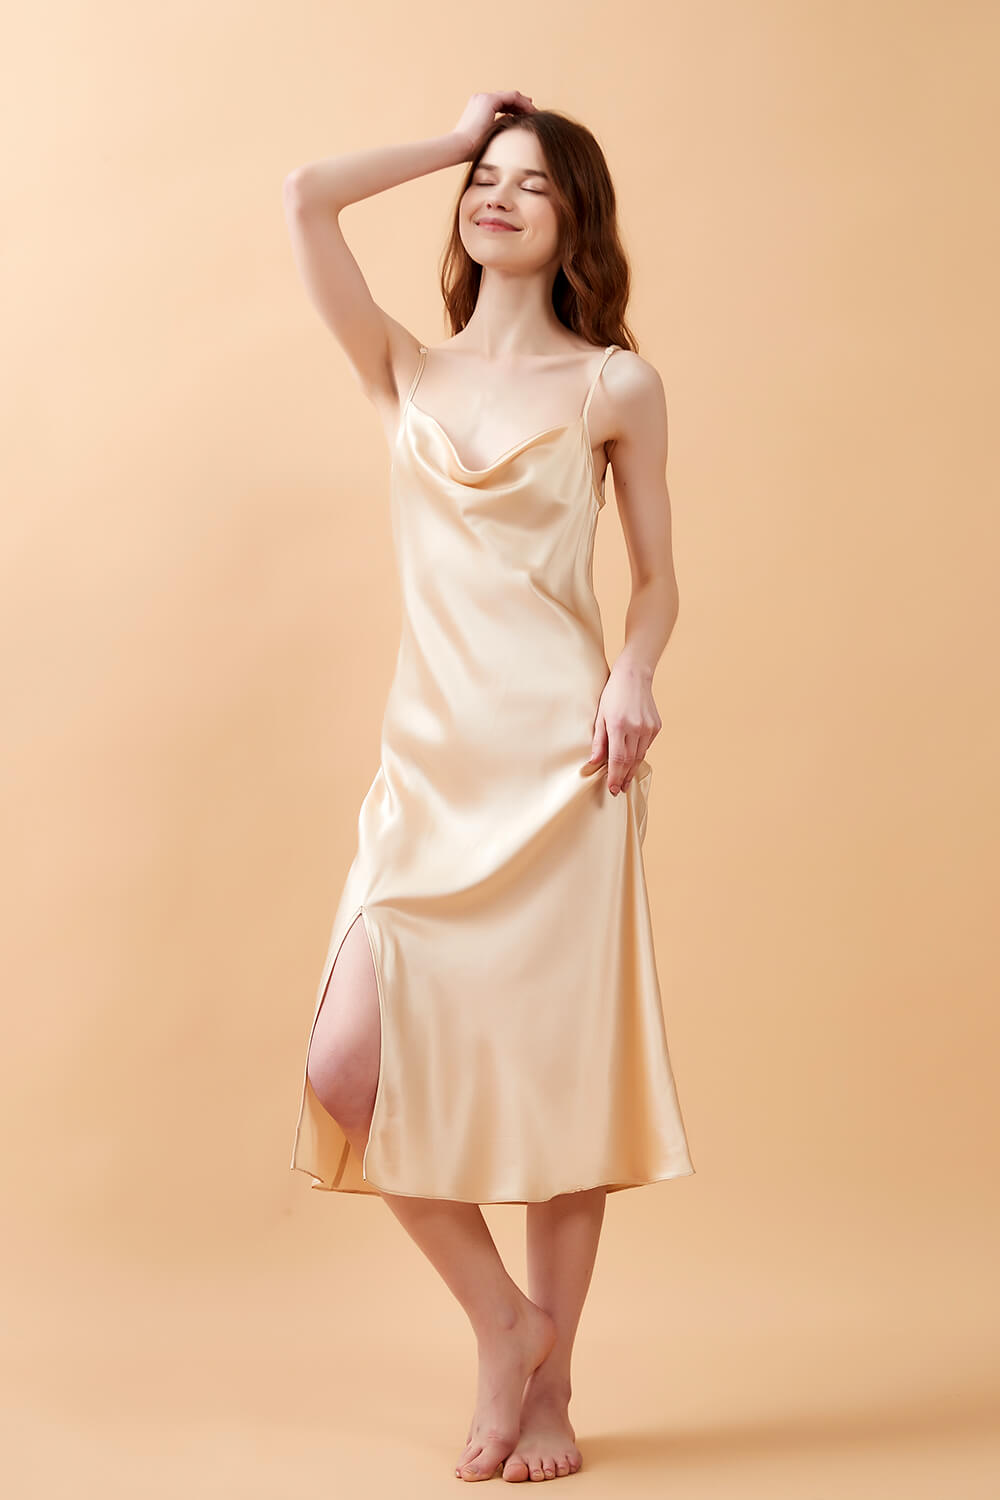 Champagne Gold Silk Cowl Neck Night Dress with Side Slit - BASK™